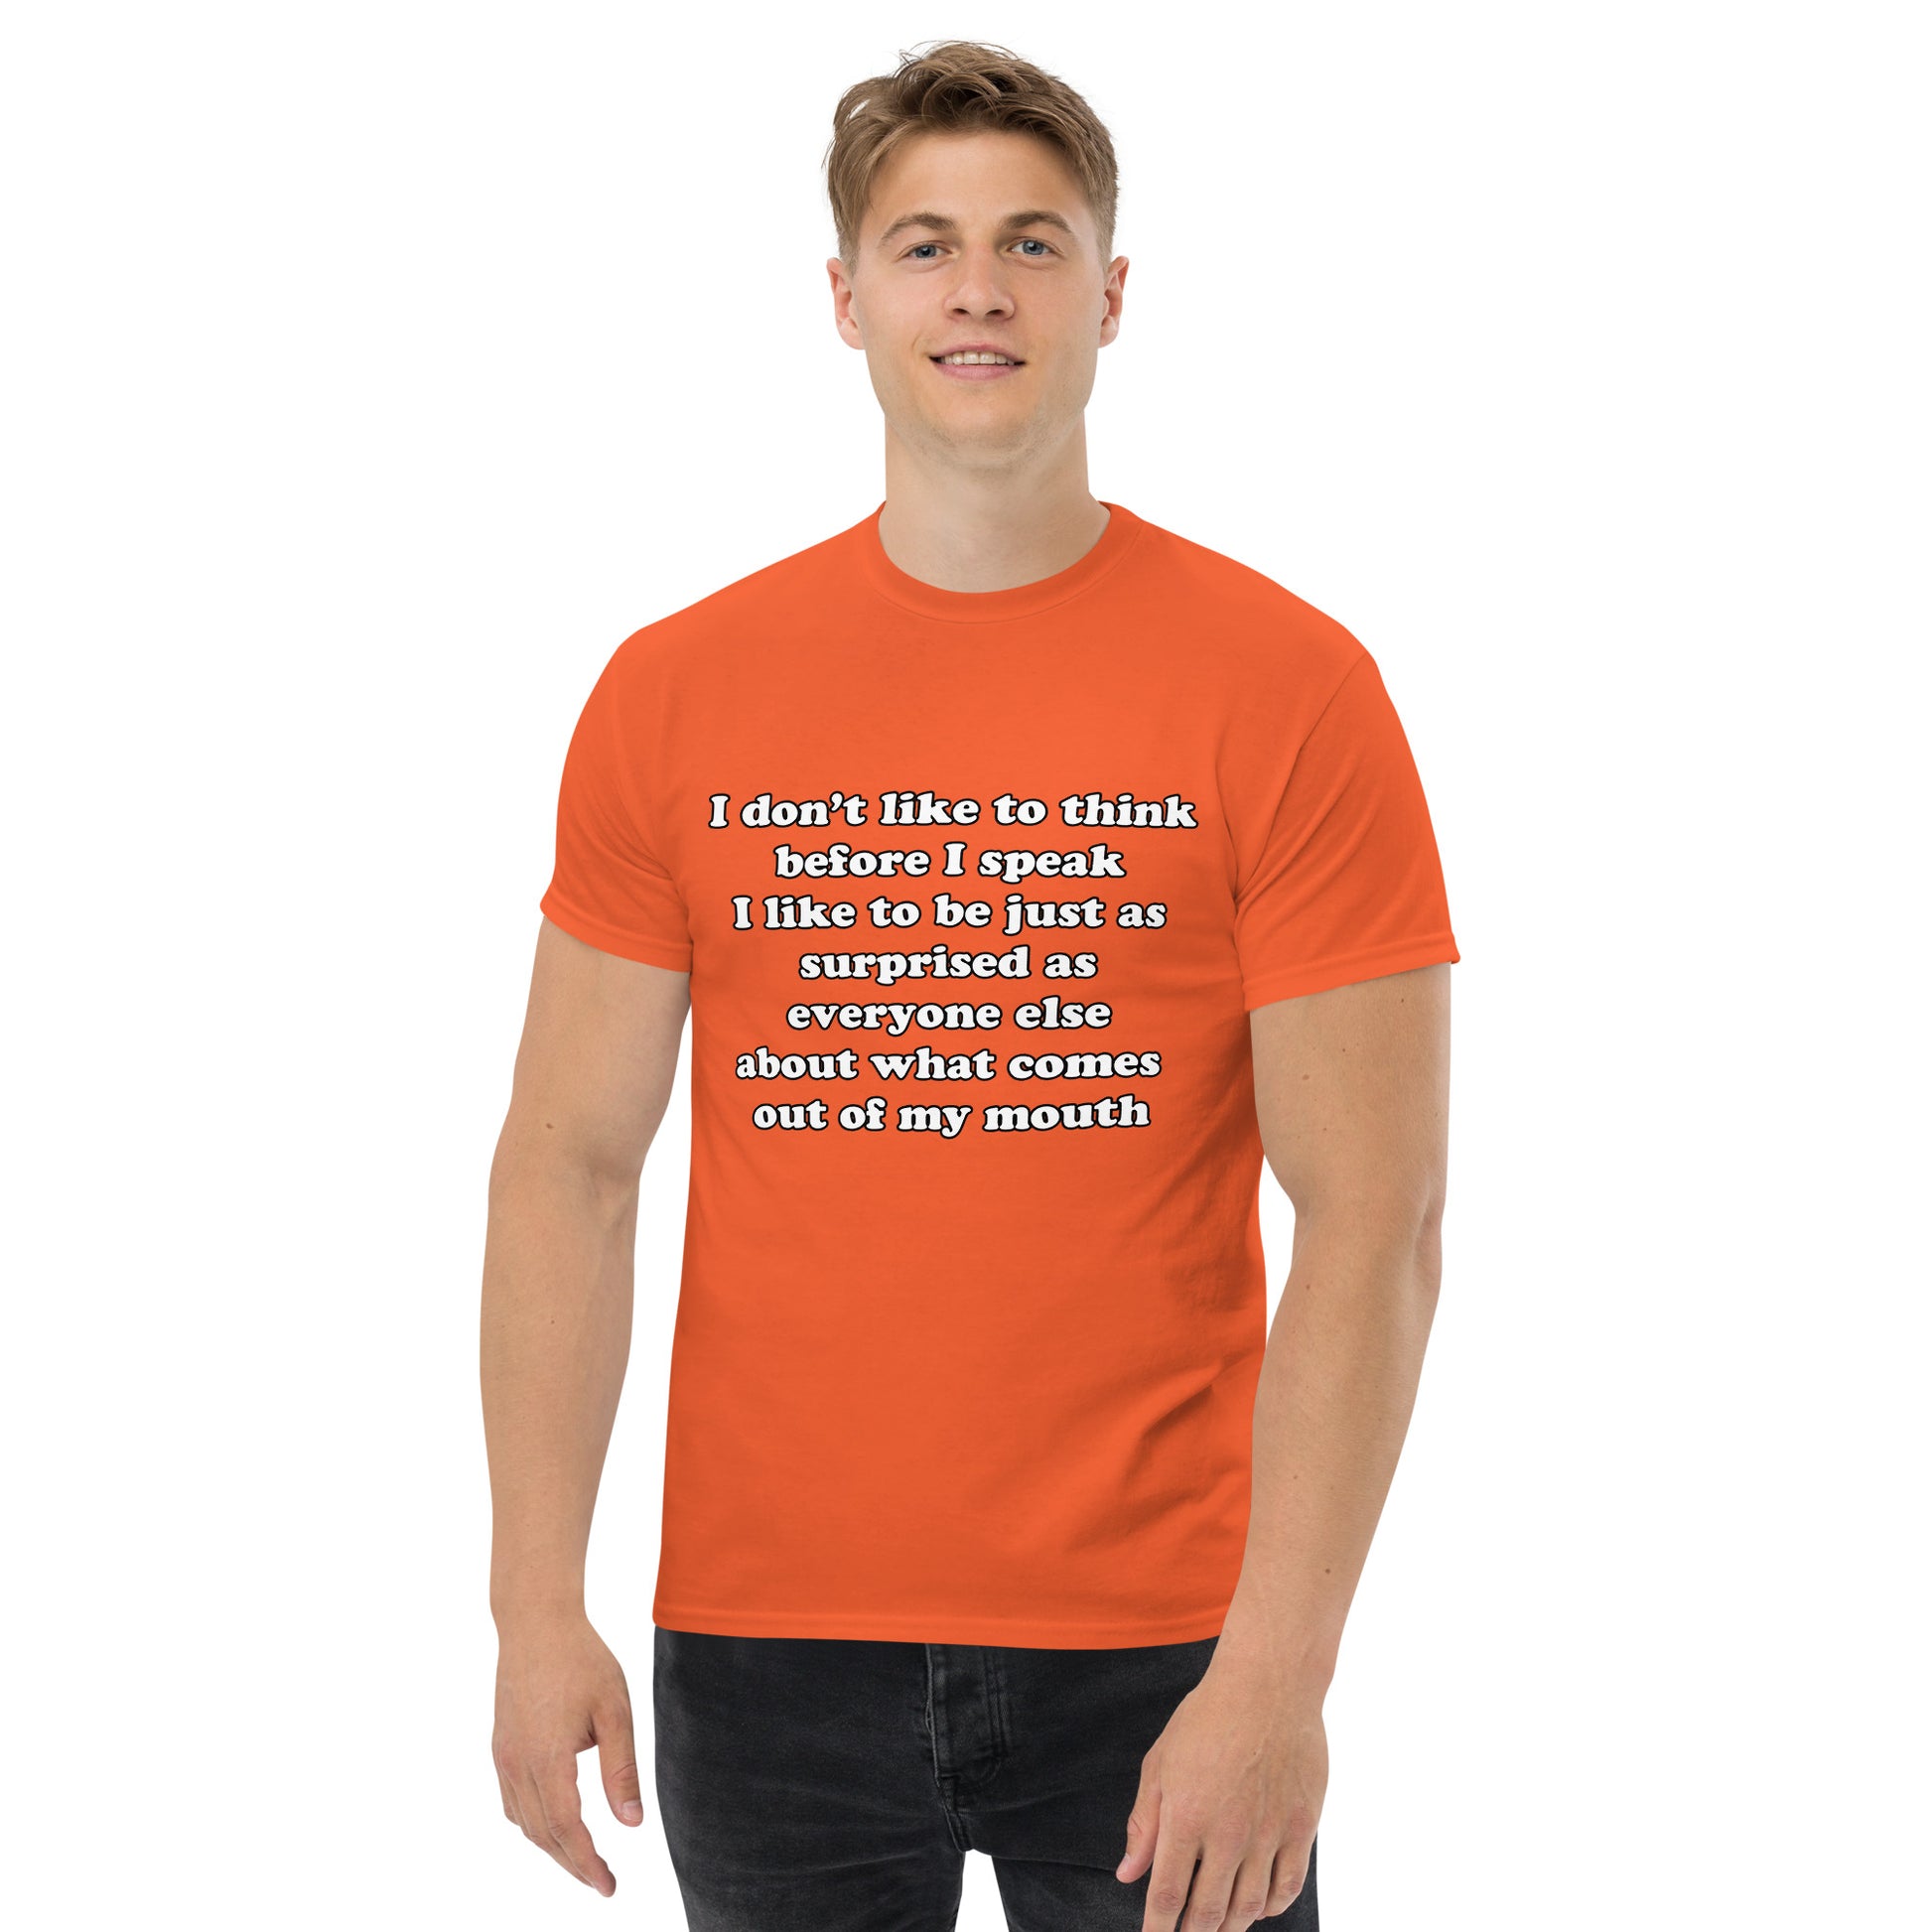 Man with orange t-shirt with text “I don't think before I speak Just as serprised as everyone about what comes out of my mouth"